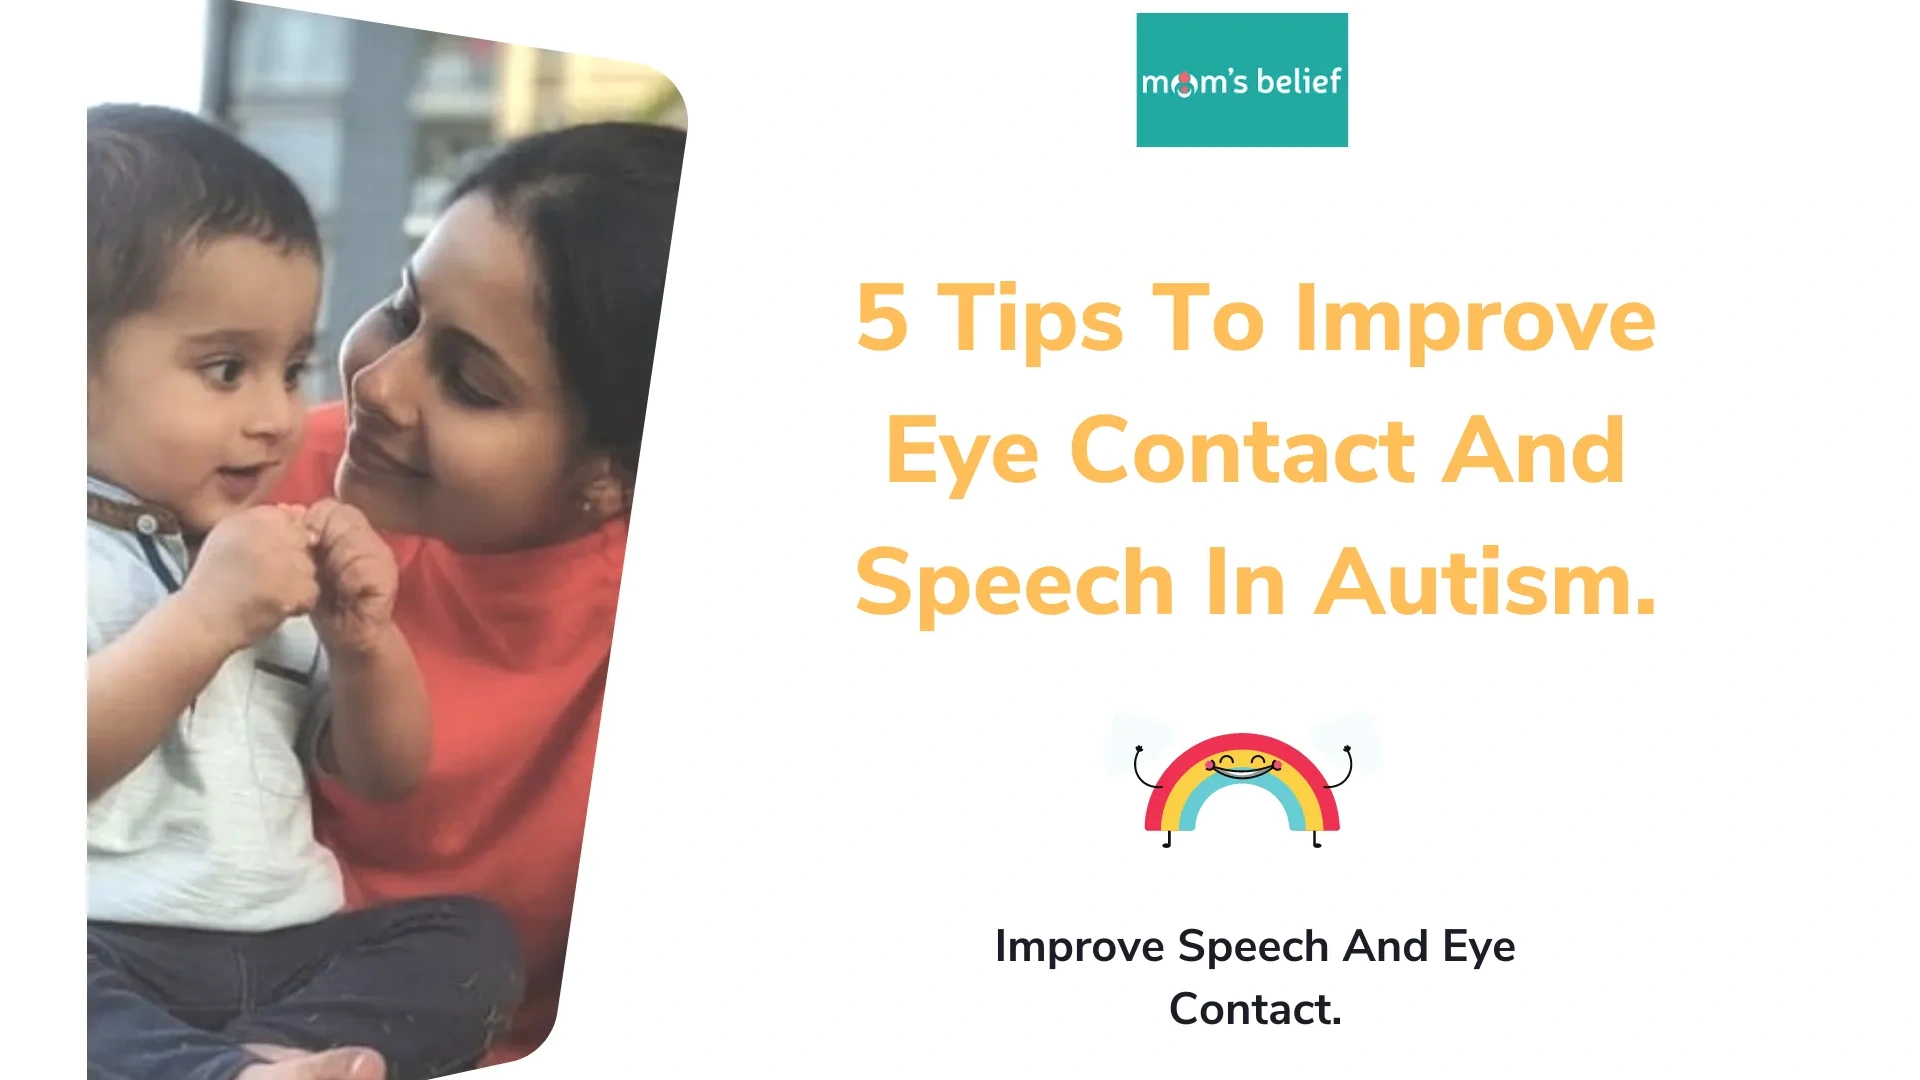 5 Tips to Improve Eye Contact and Speech in Autism